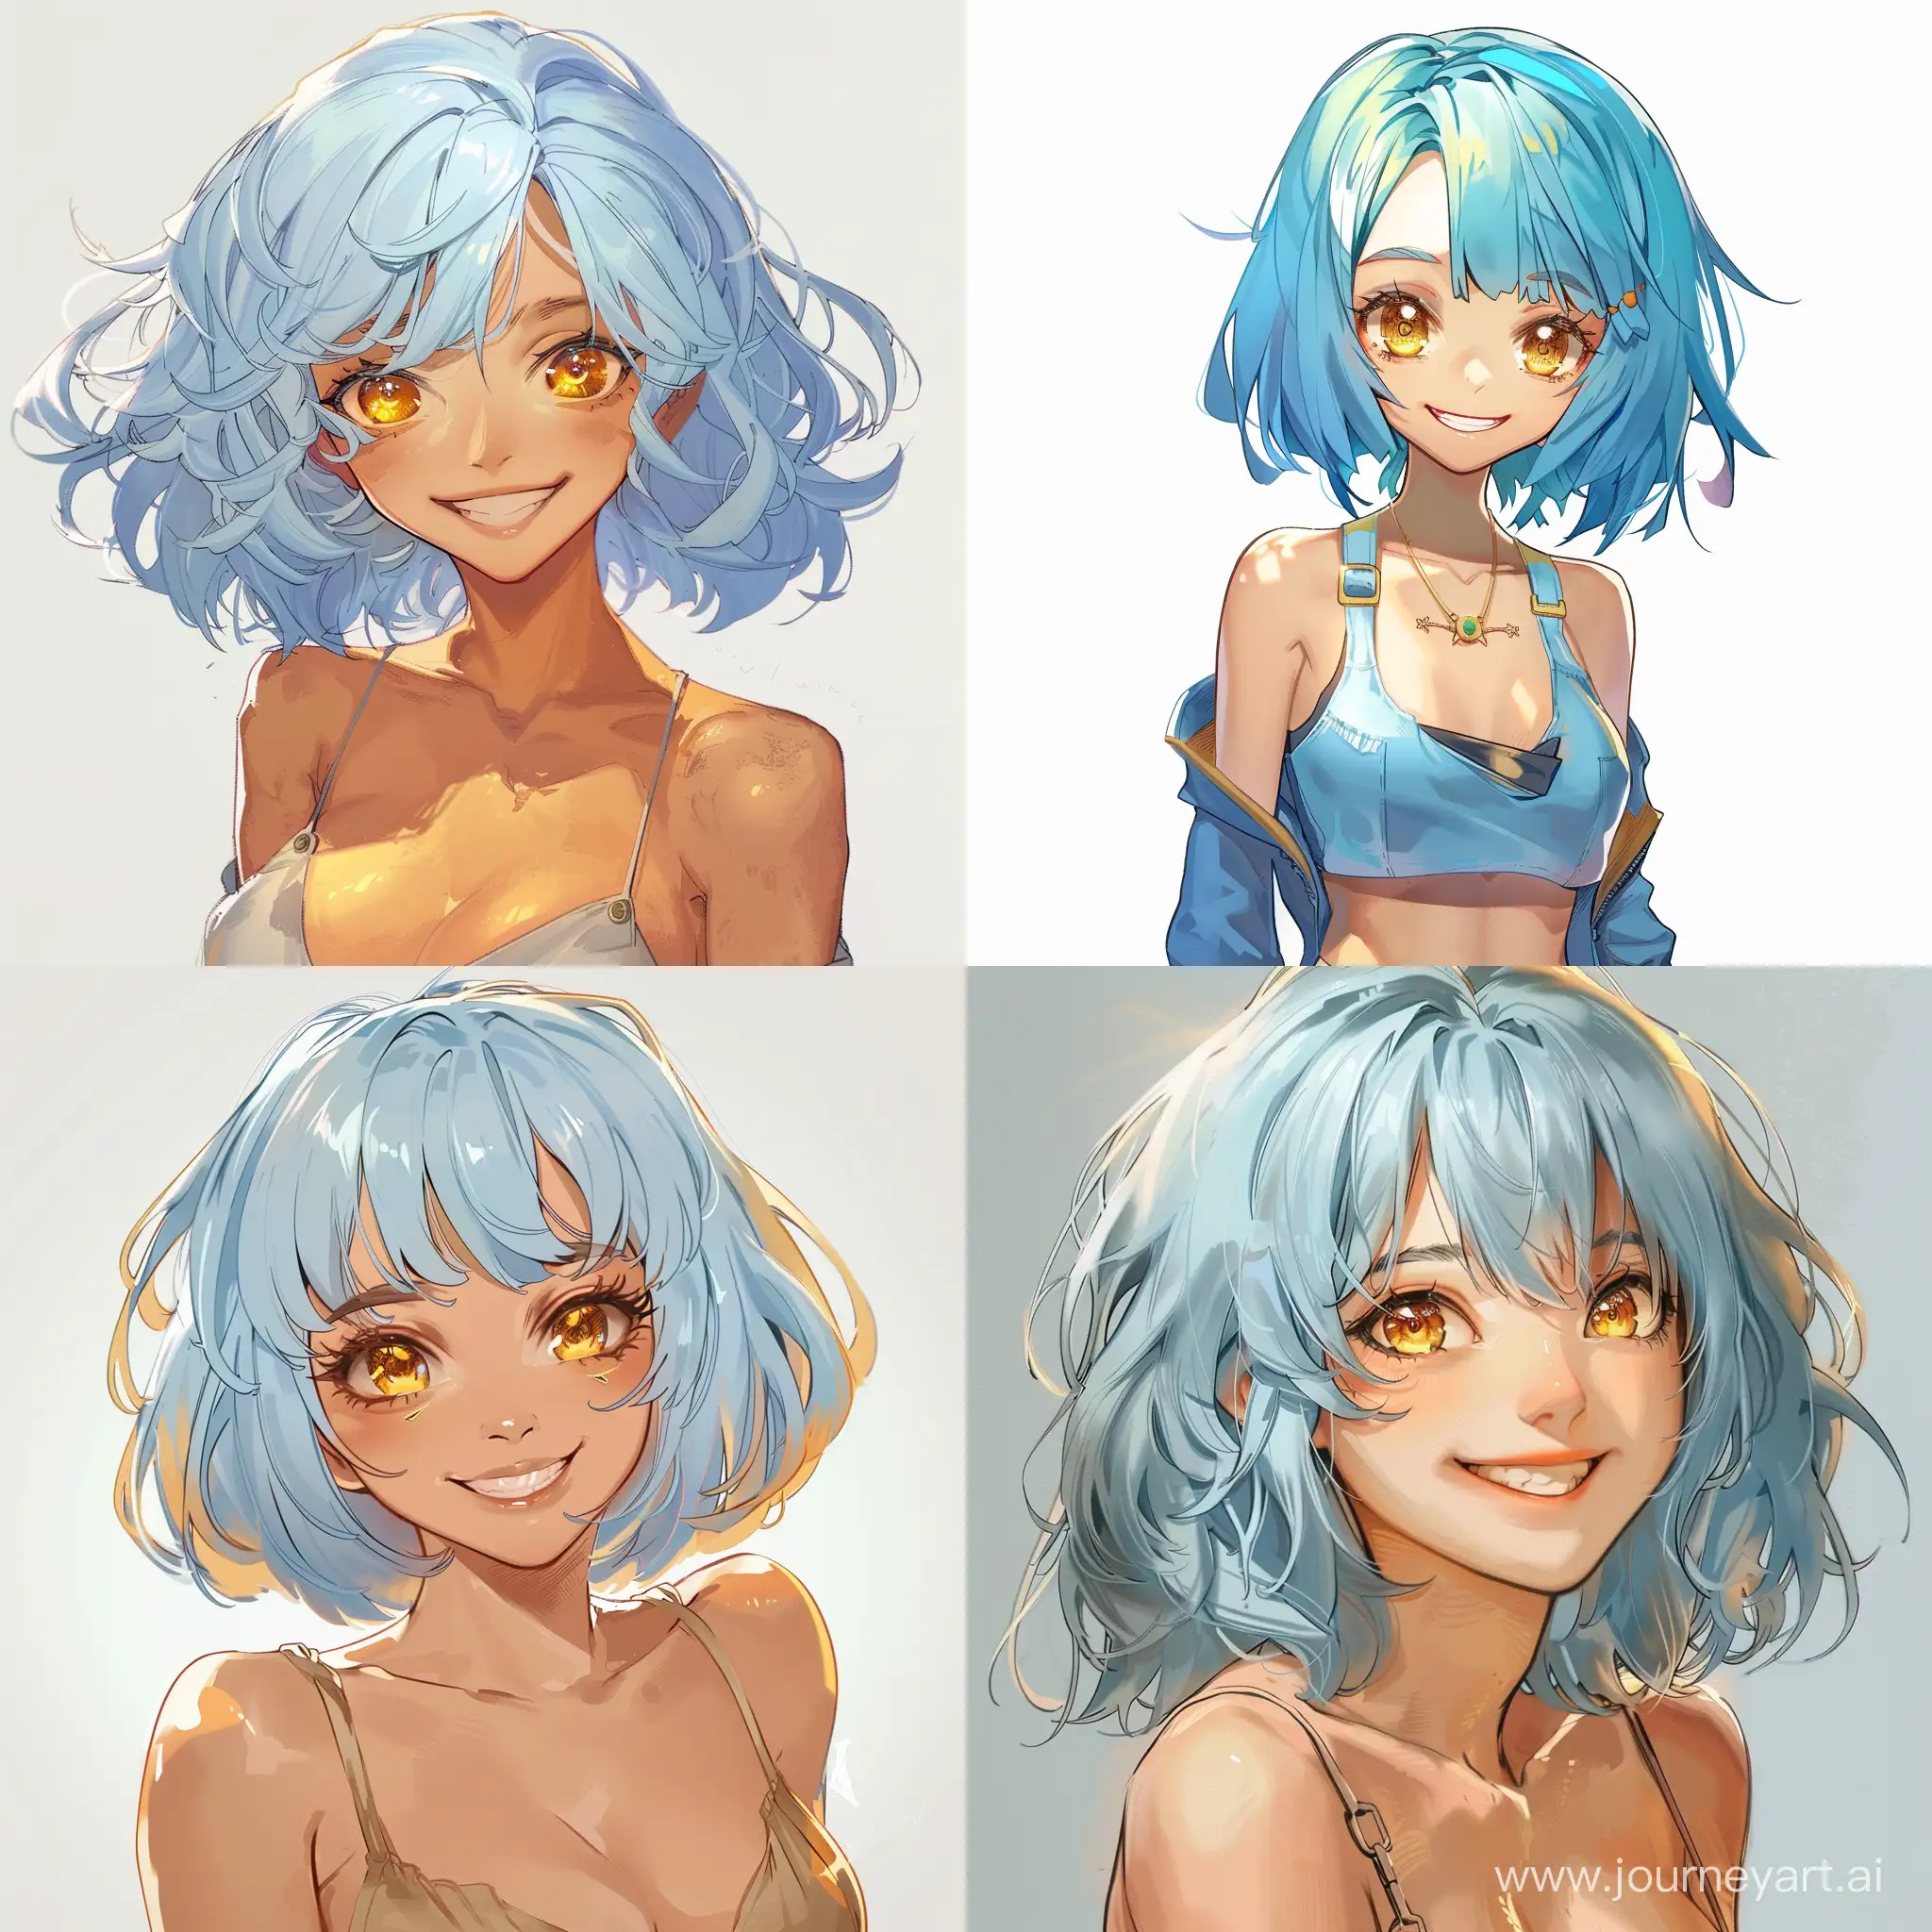 character design for a cute anime girl with light blue azure hair, golden eyes, a warm smile, short stature, and dressed in tight clothes